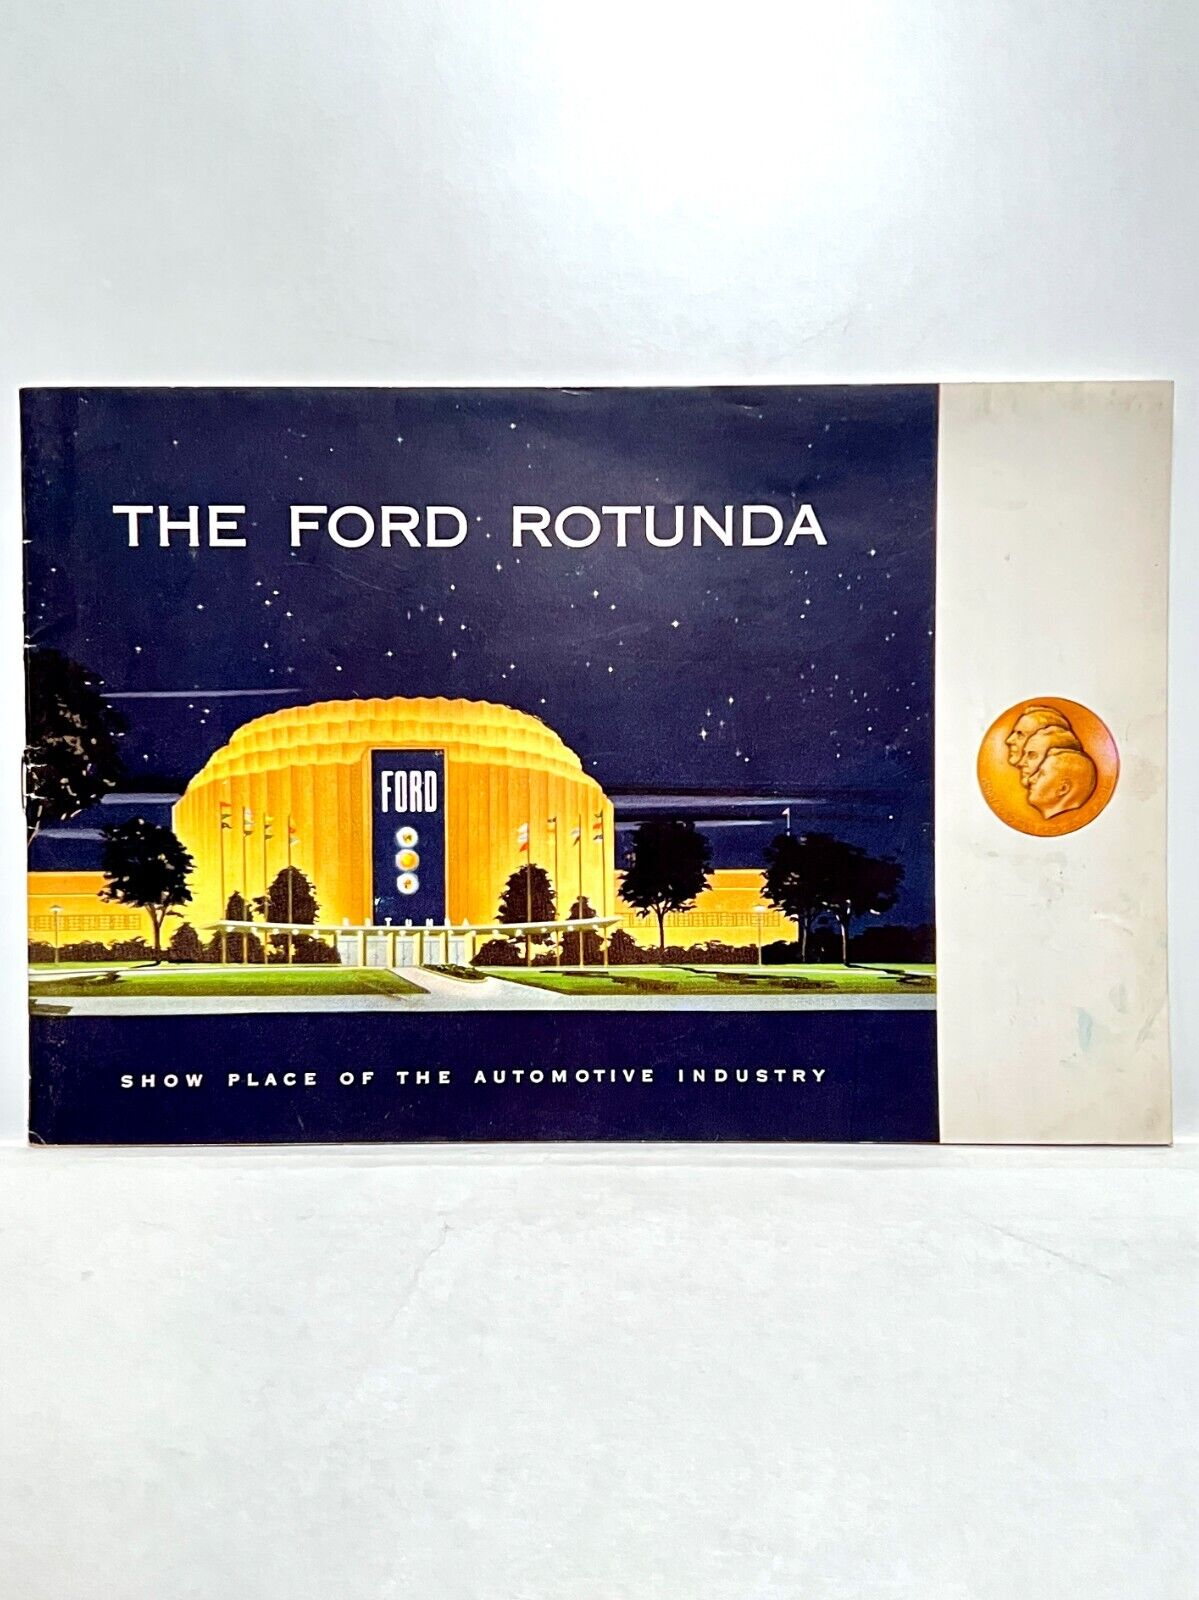 Vintage 1954 The Ford Rotunda Show Place of the Automotive Industry Booklet